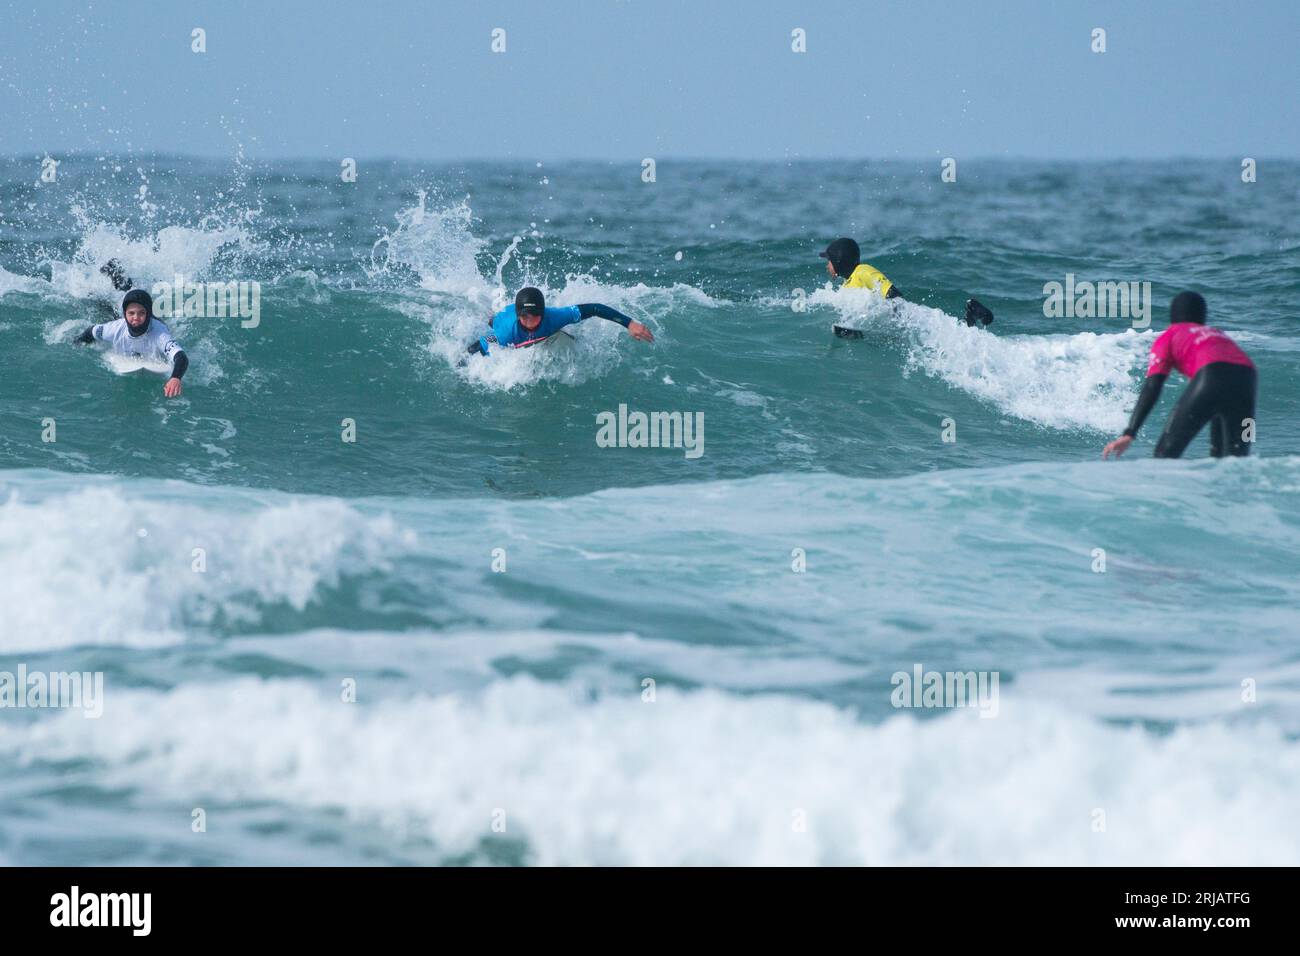 Young competitors riding a wave during the Rip Curl Grom Search surfing competition at Fistral in Newquay in Cornwall in the UK. Stock Photo